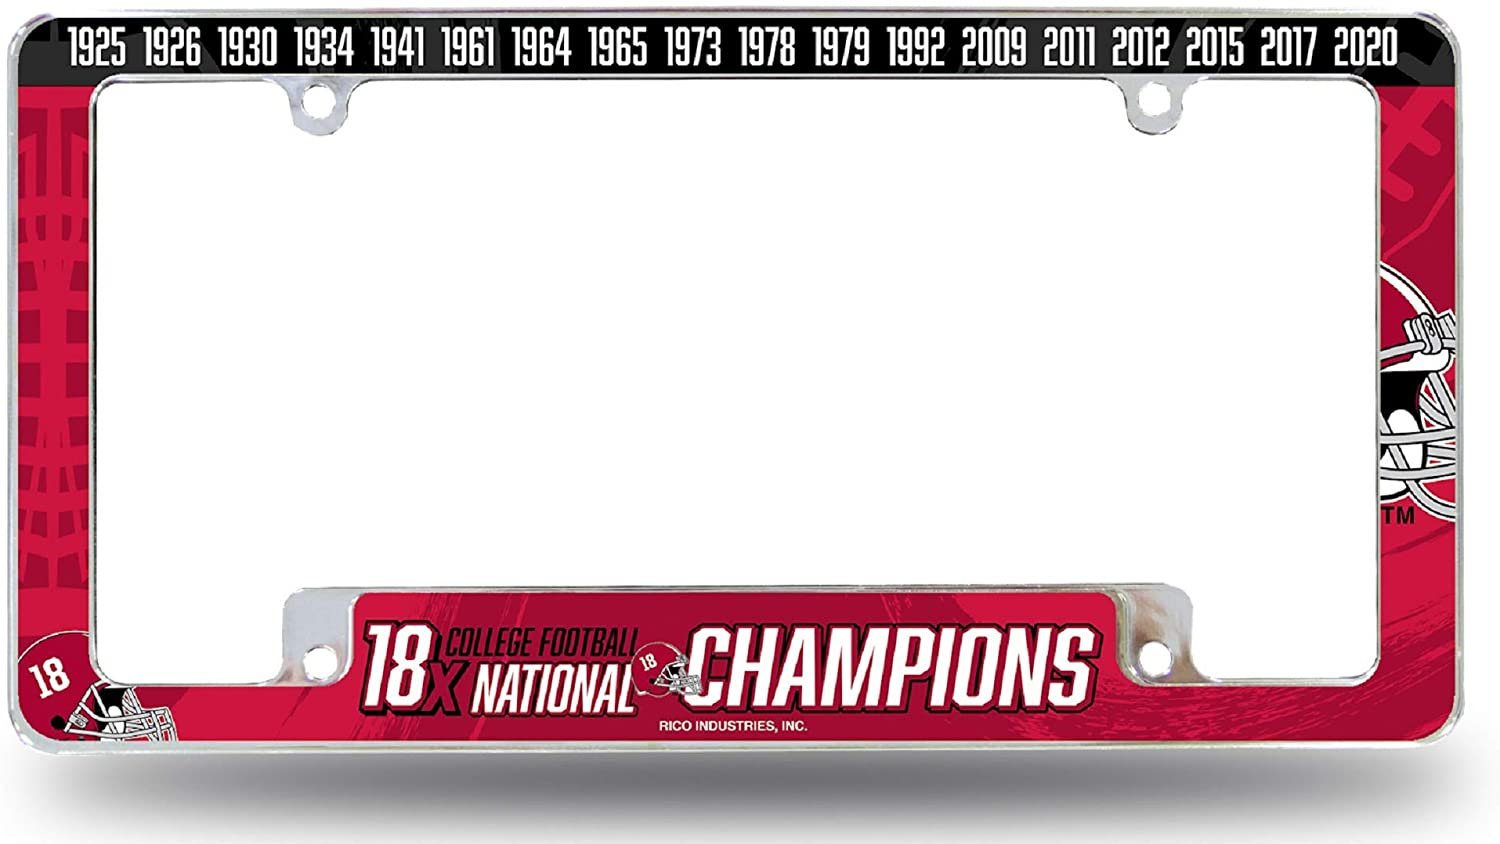 University of Alabama Crimson Tide 18X Time Champions Metal License Plate Frame Chrome Tag Cover, All Over Design, 6x12 Inch